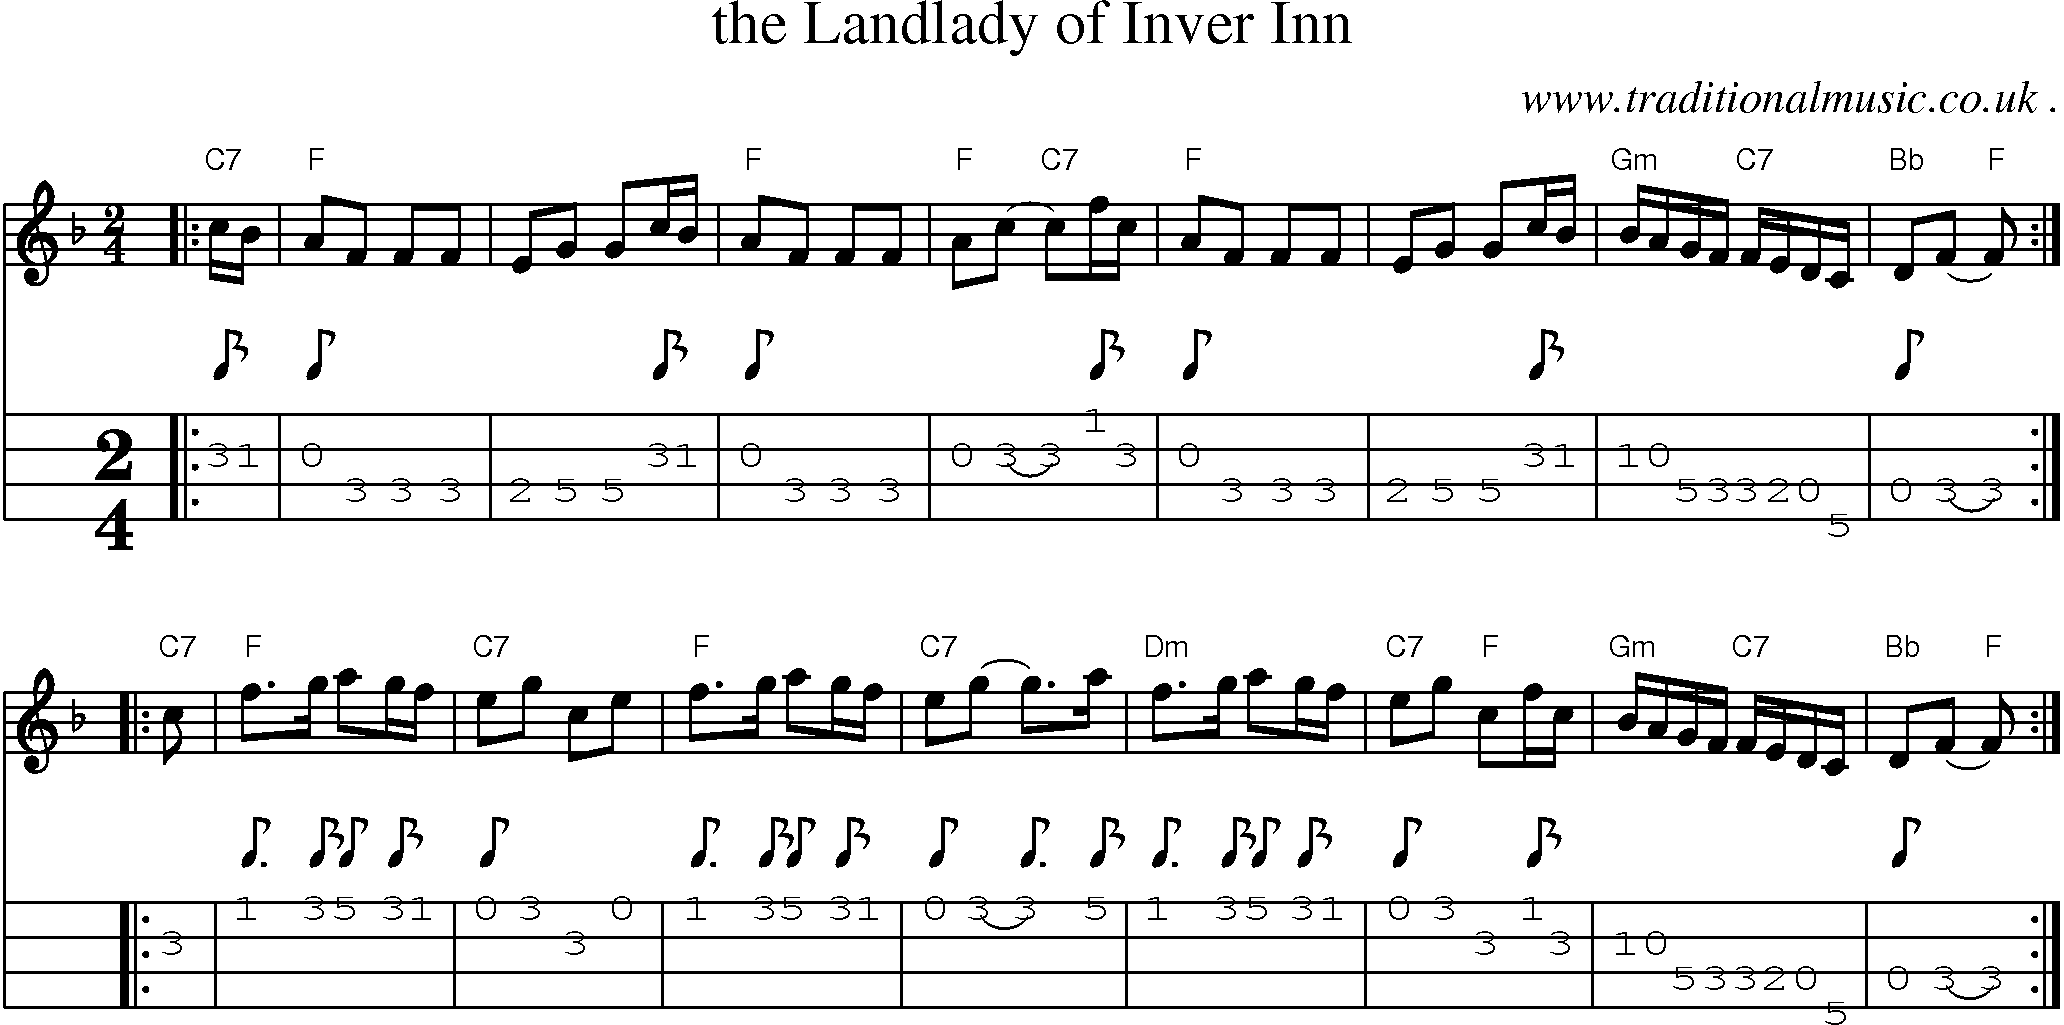 Sheet-music  score, Chords and Mandolin Tabs for The Landlady Of Inver Inn